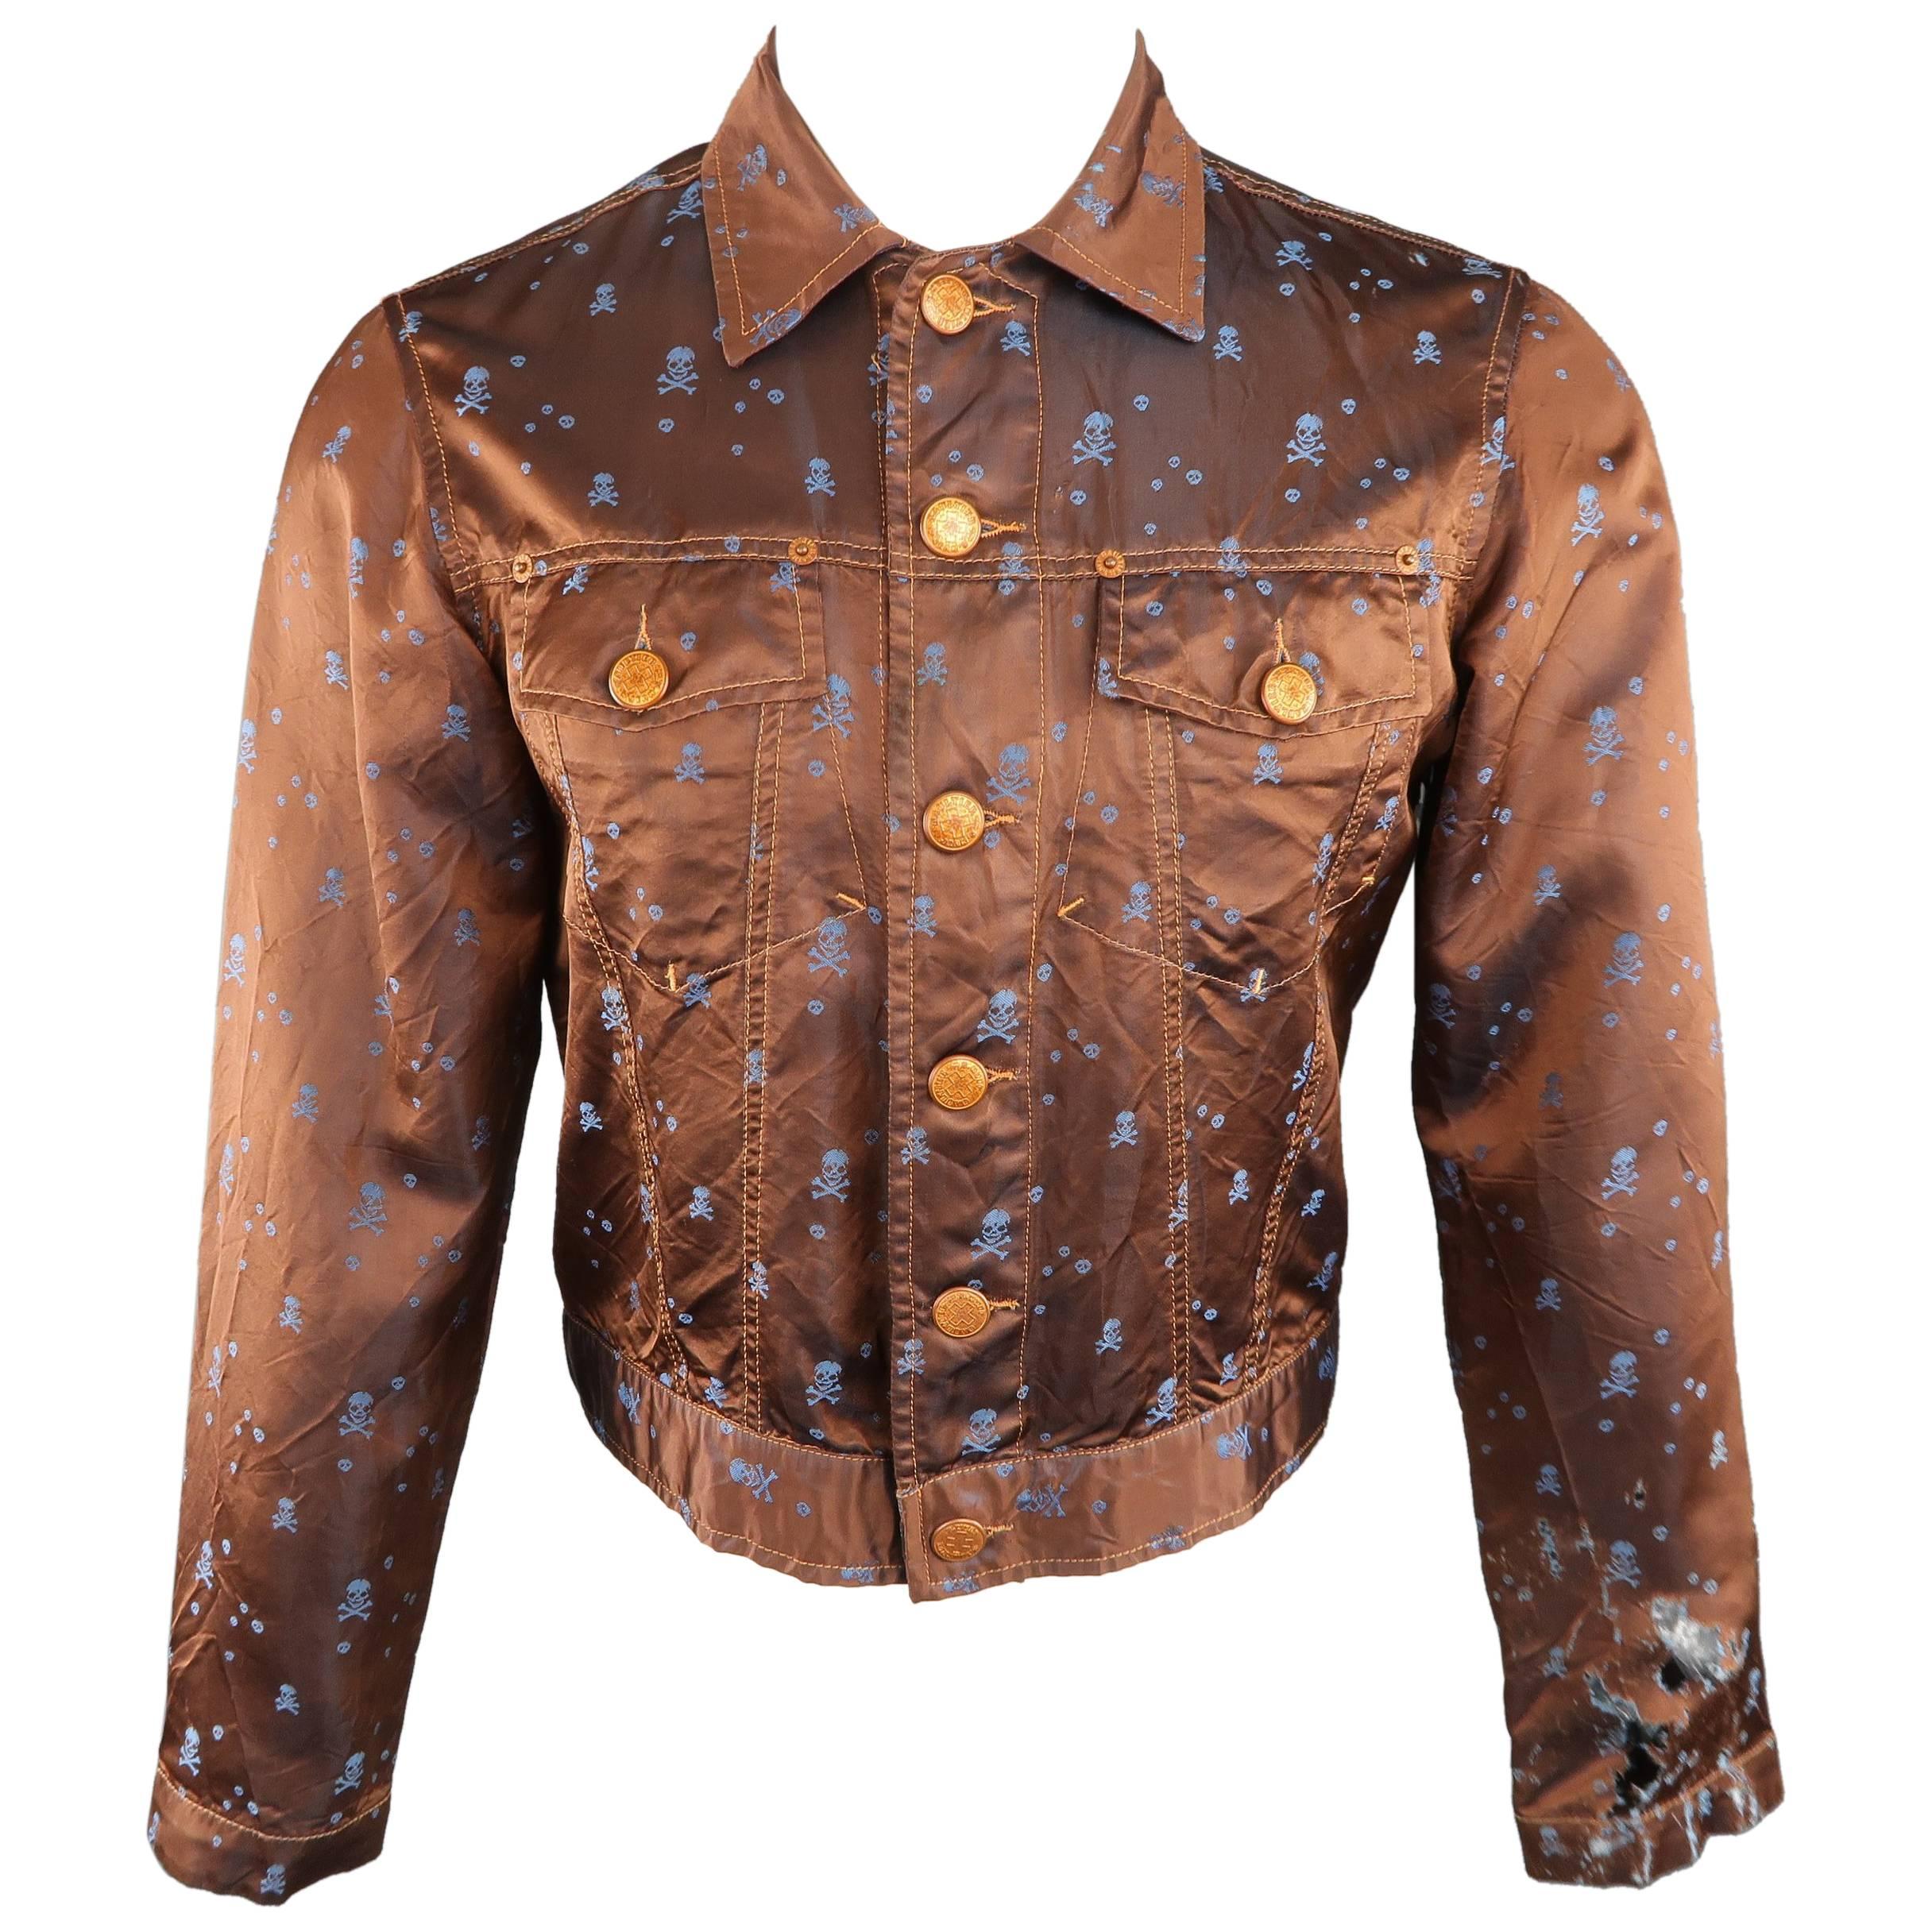 GAULTIER JEANS by JEAN PAUL GAULTIER M Copper and Blue Skull Print